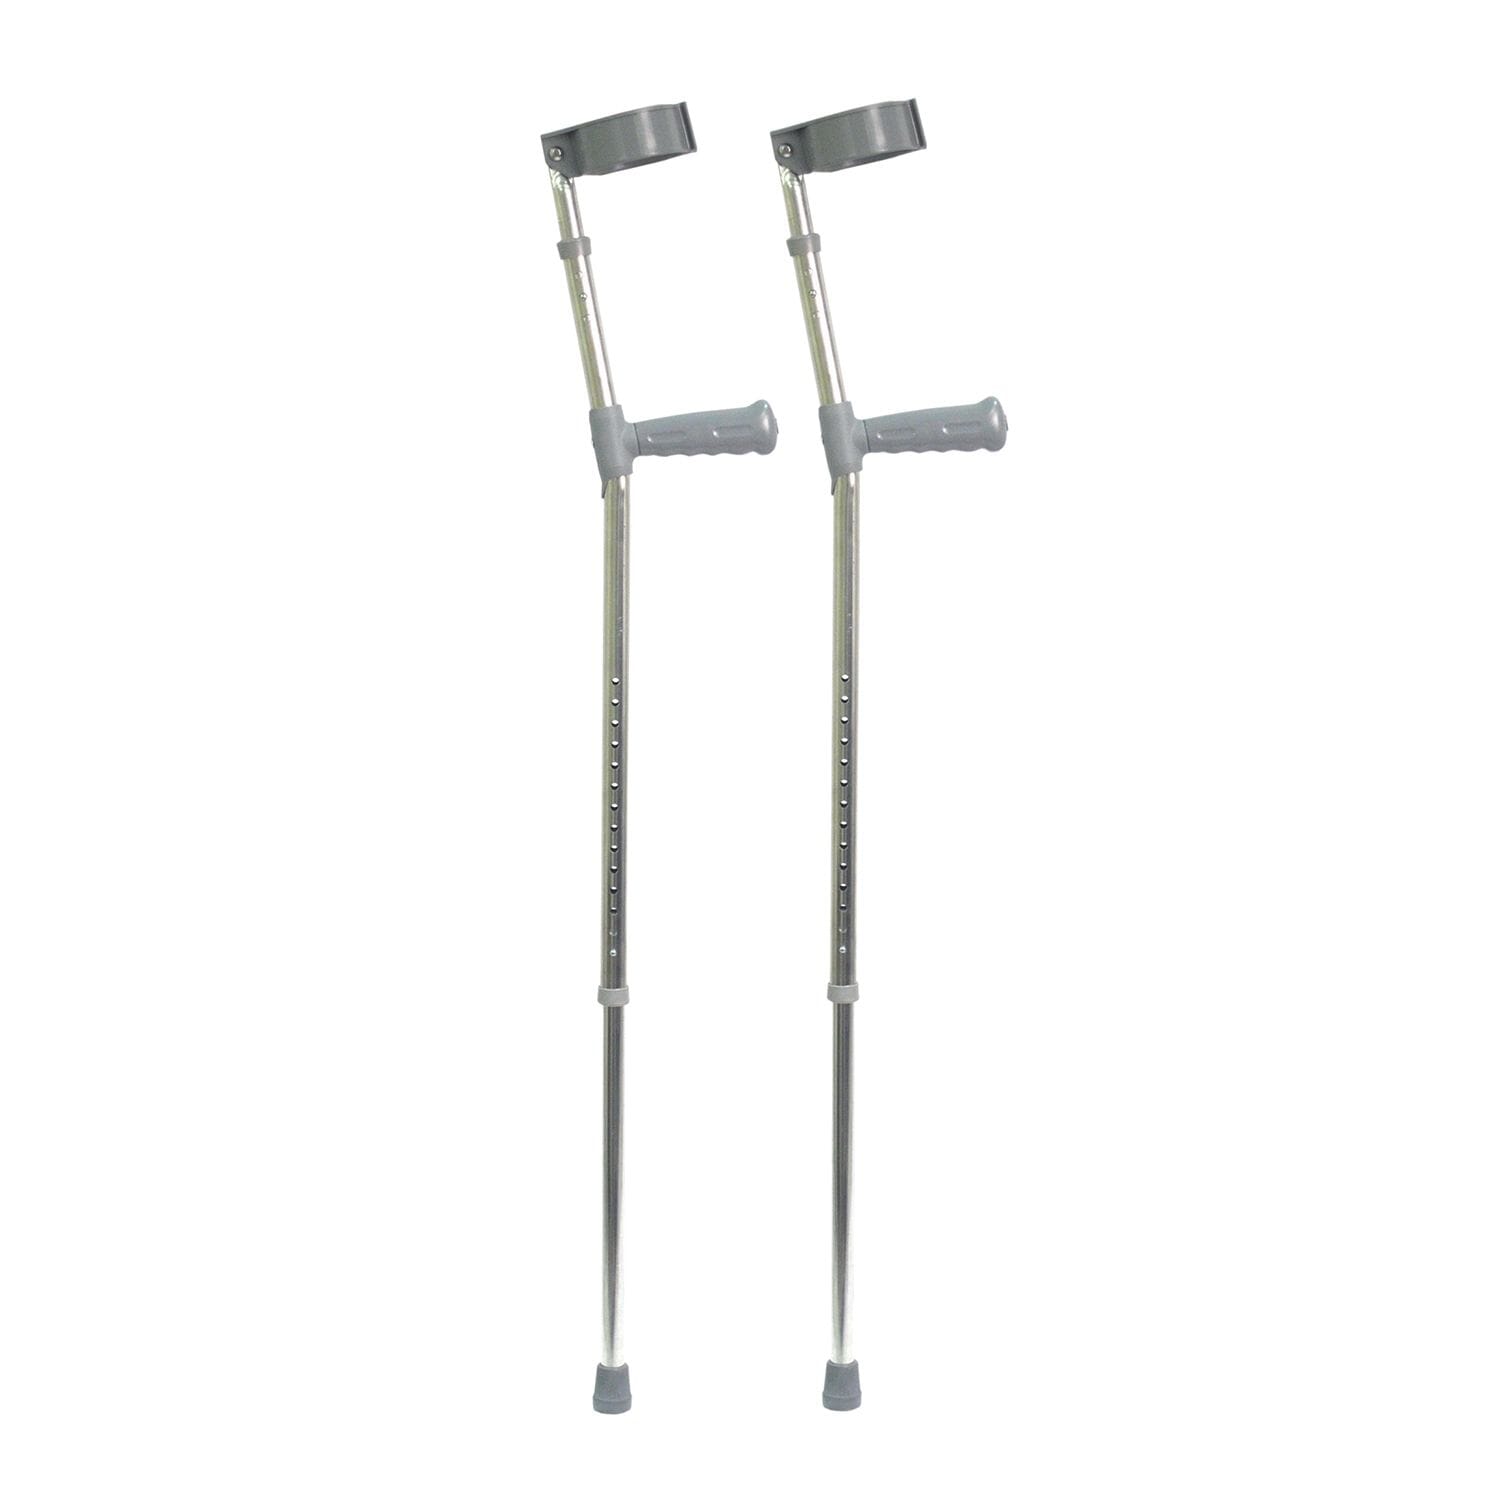 View Aidapt Bariatric Double Adjustable Crutch Pair information